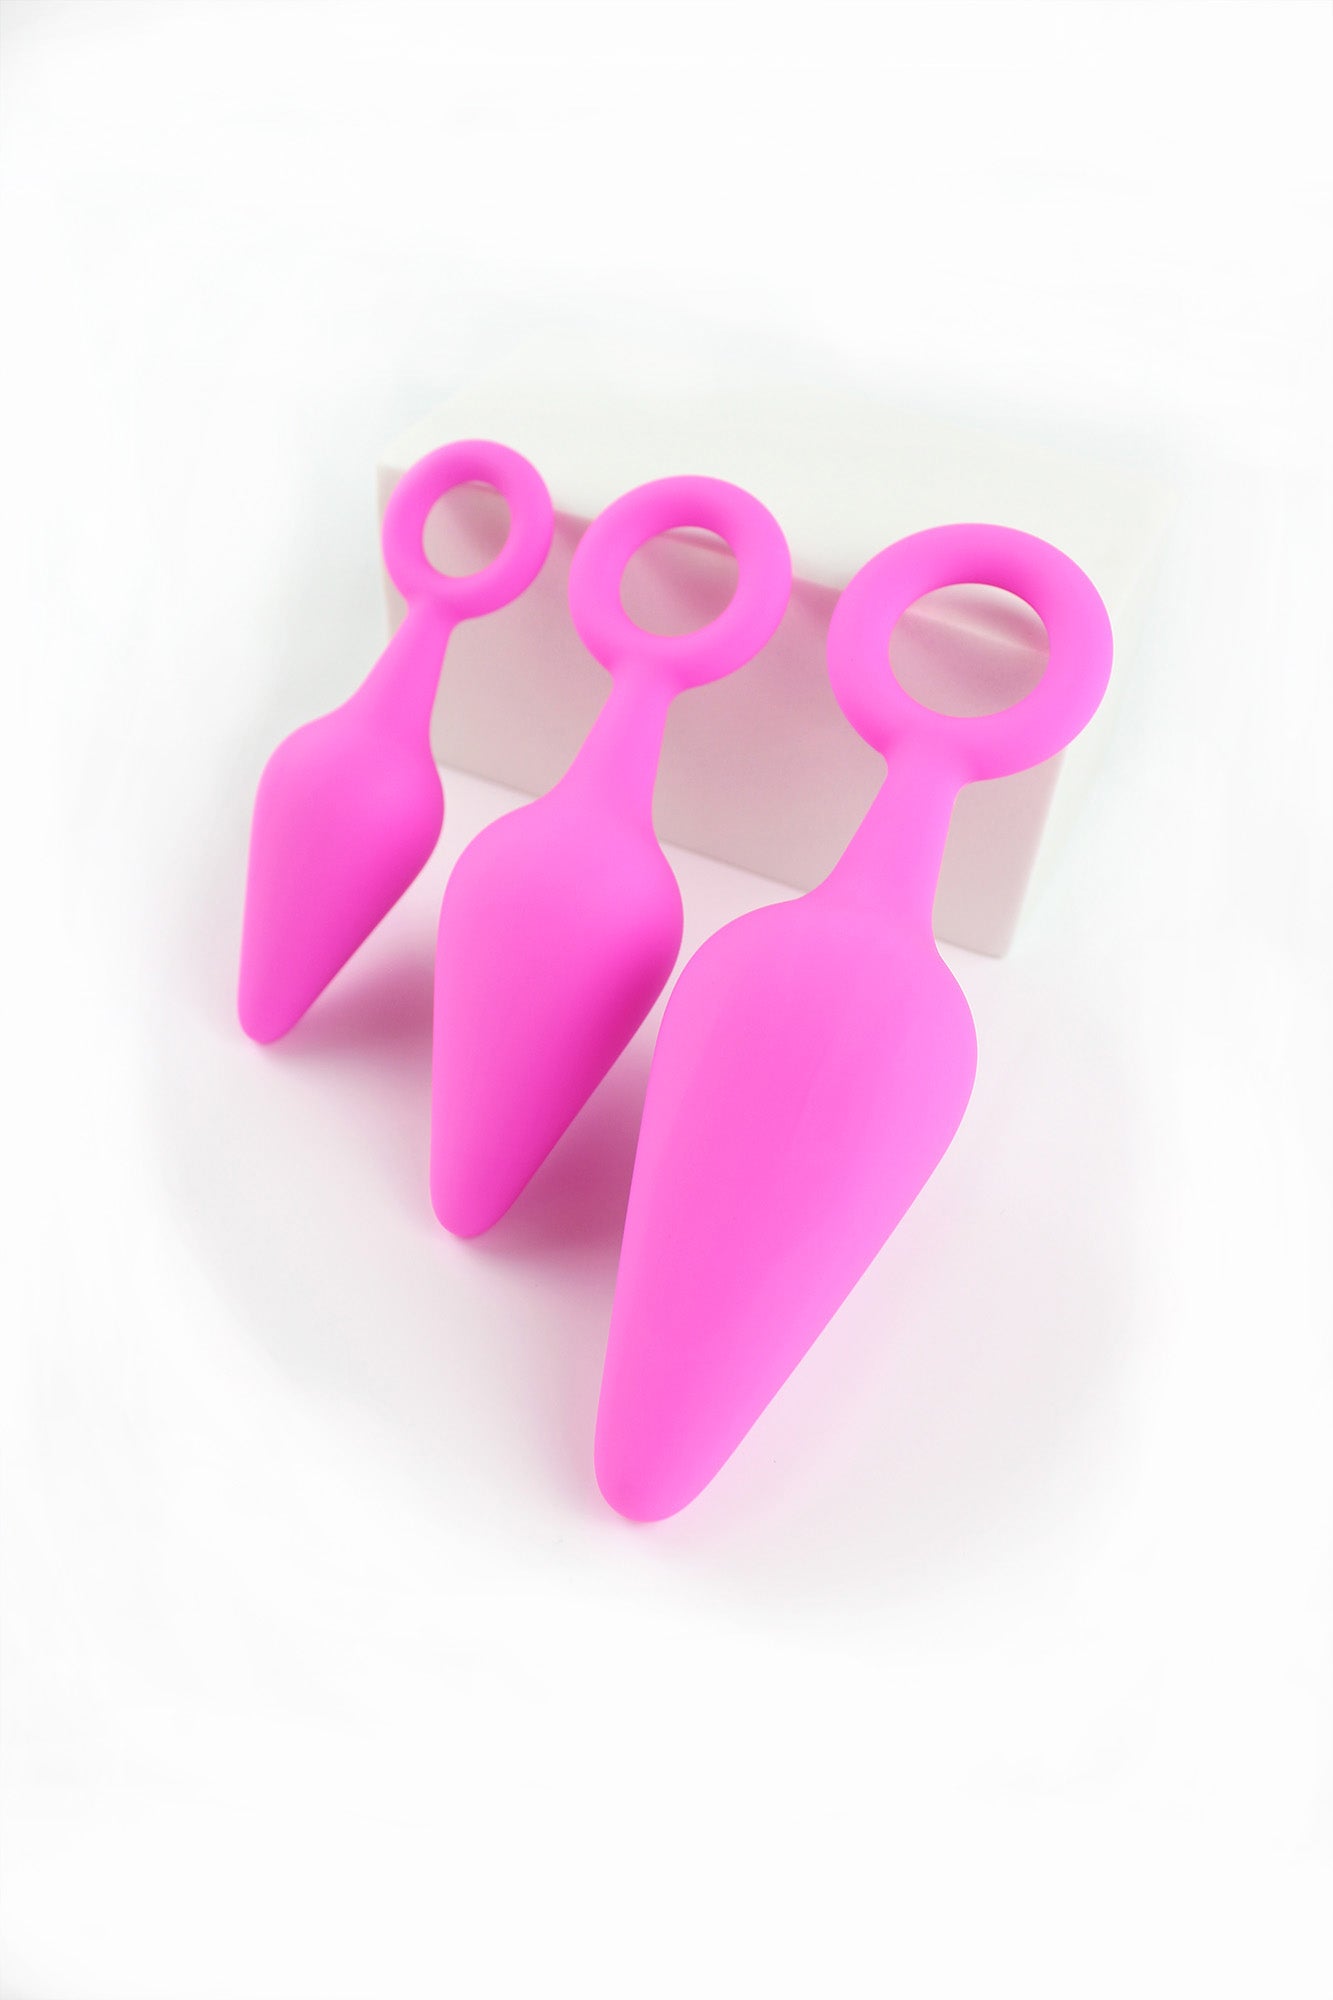 3 sizes of pink silicone anal trainers propped against a white block on a white background